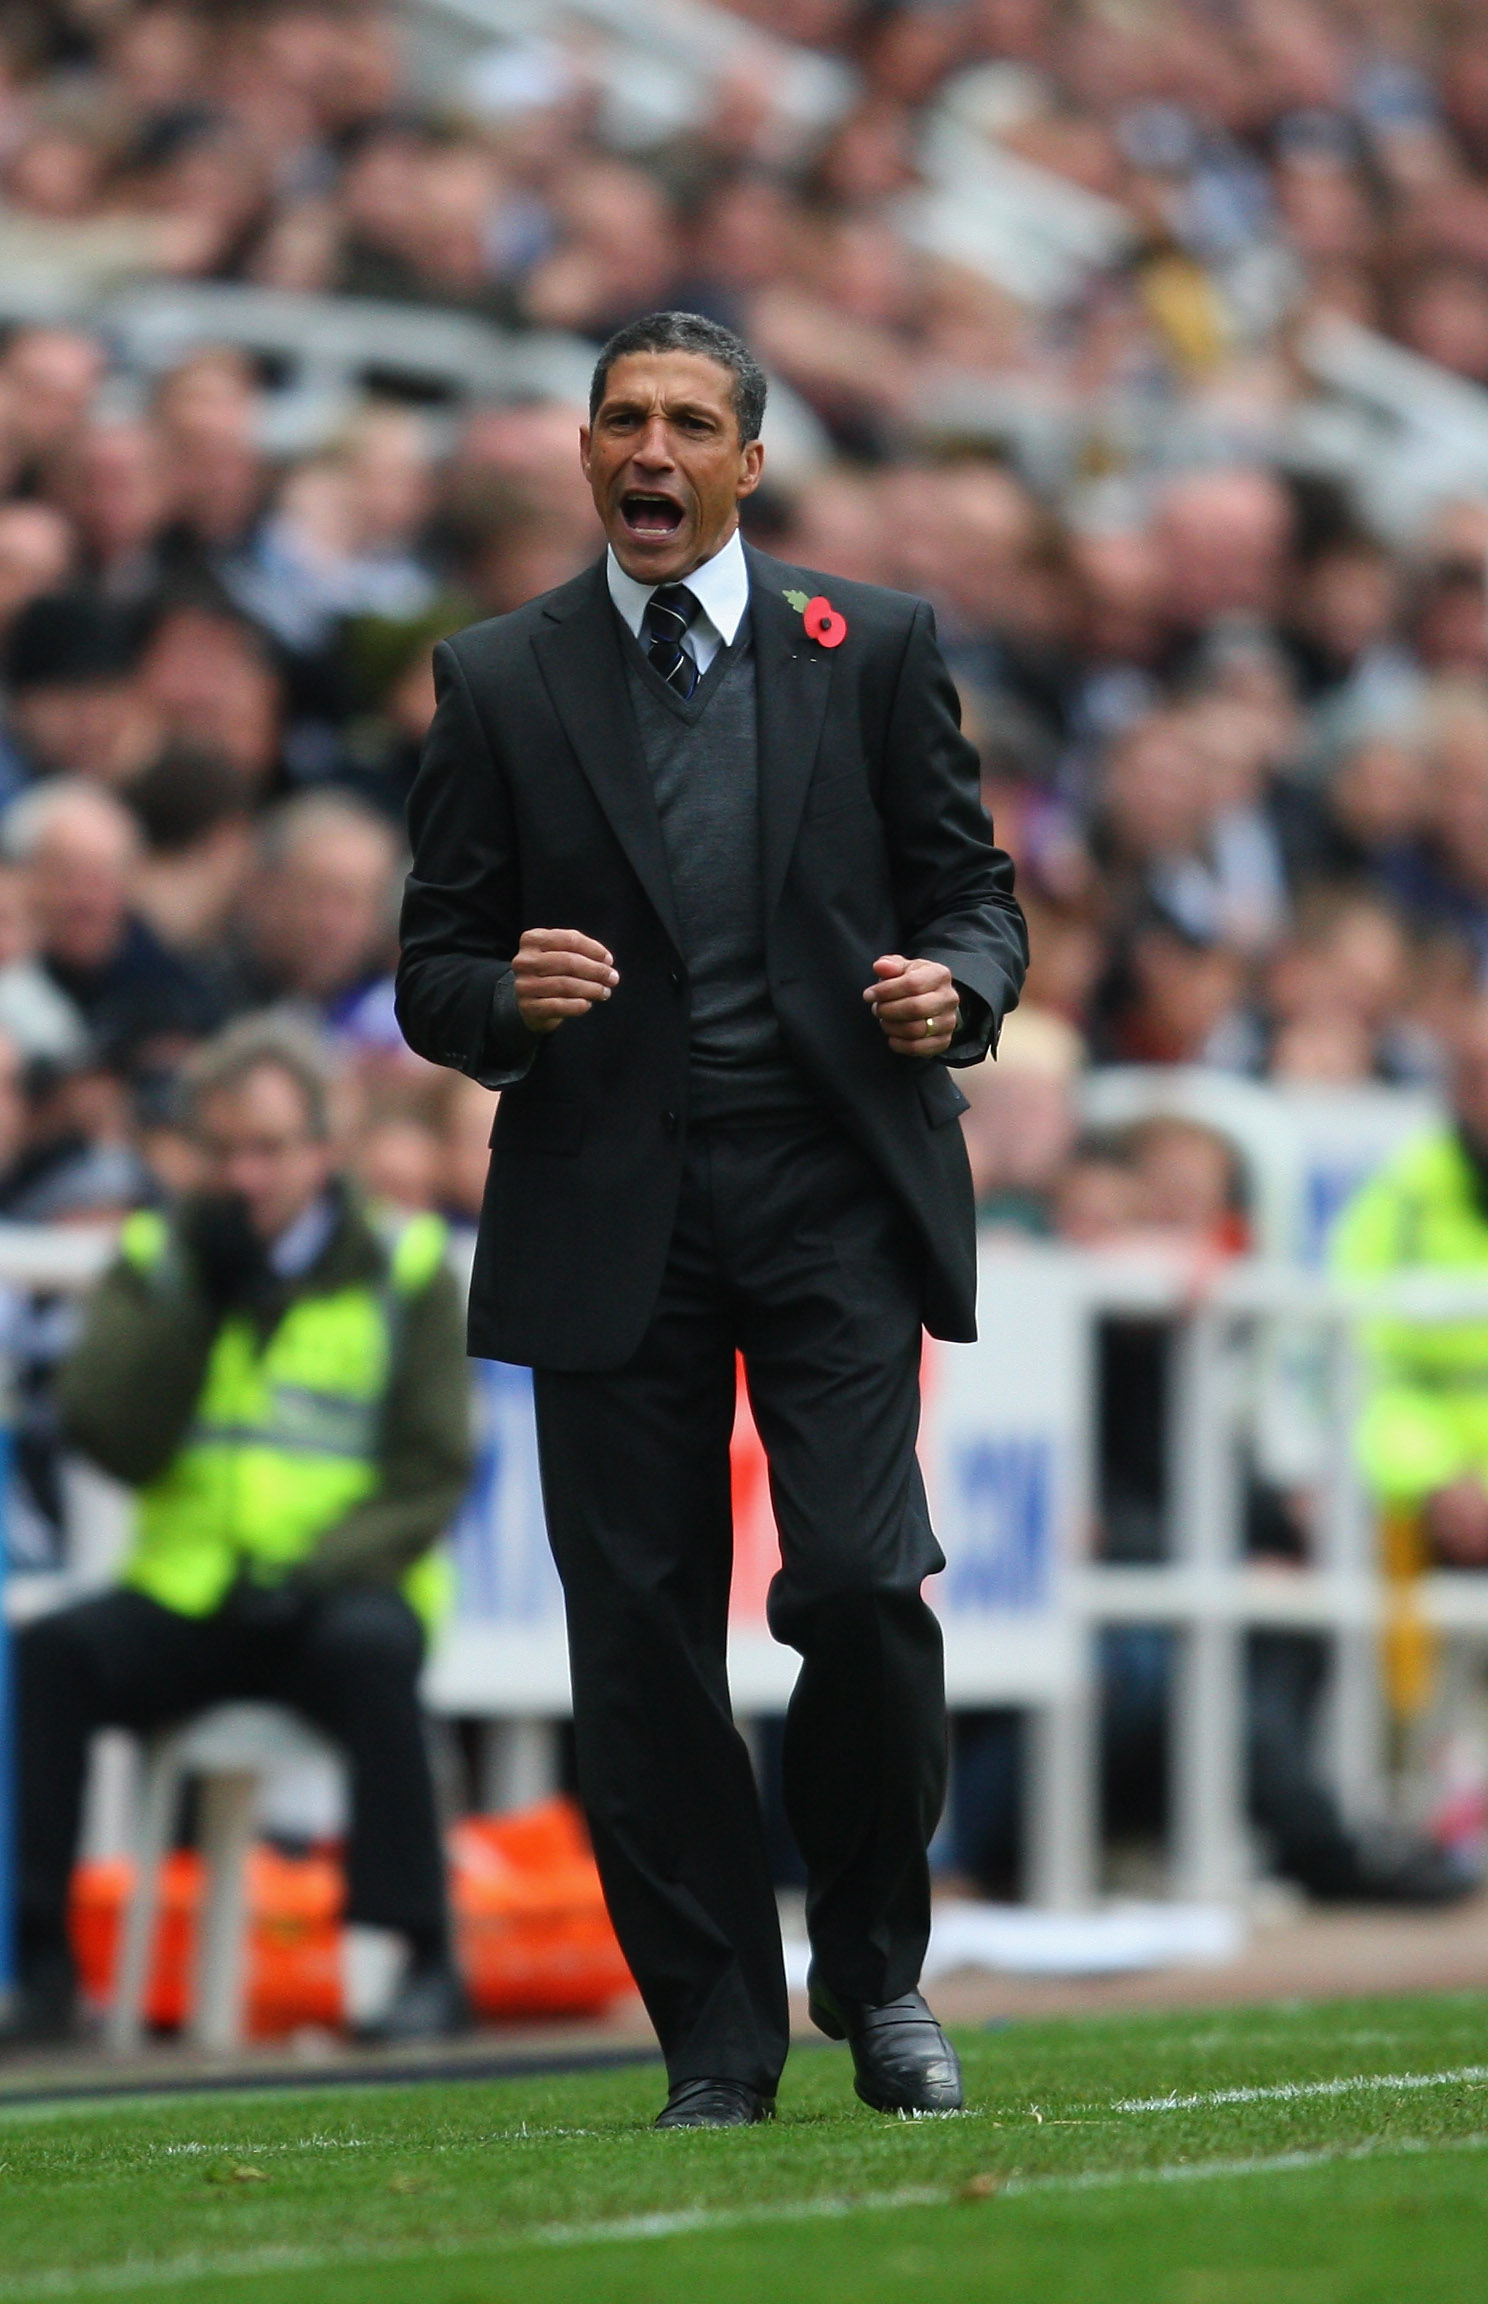 NEWCASTLE UPON TYNE, ENGLAND - OCTOBER 31:  Newcastle manager Chris Hughton reacts during the Barclays Premier League match between Newcastle United and Sunderland at St James' Park on October 31, 2010 in Newcastle upon Tyne, England.  (Photo by Stu Forst